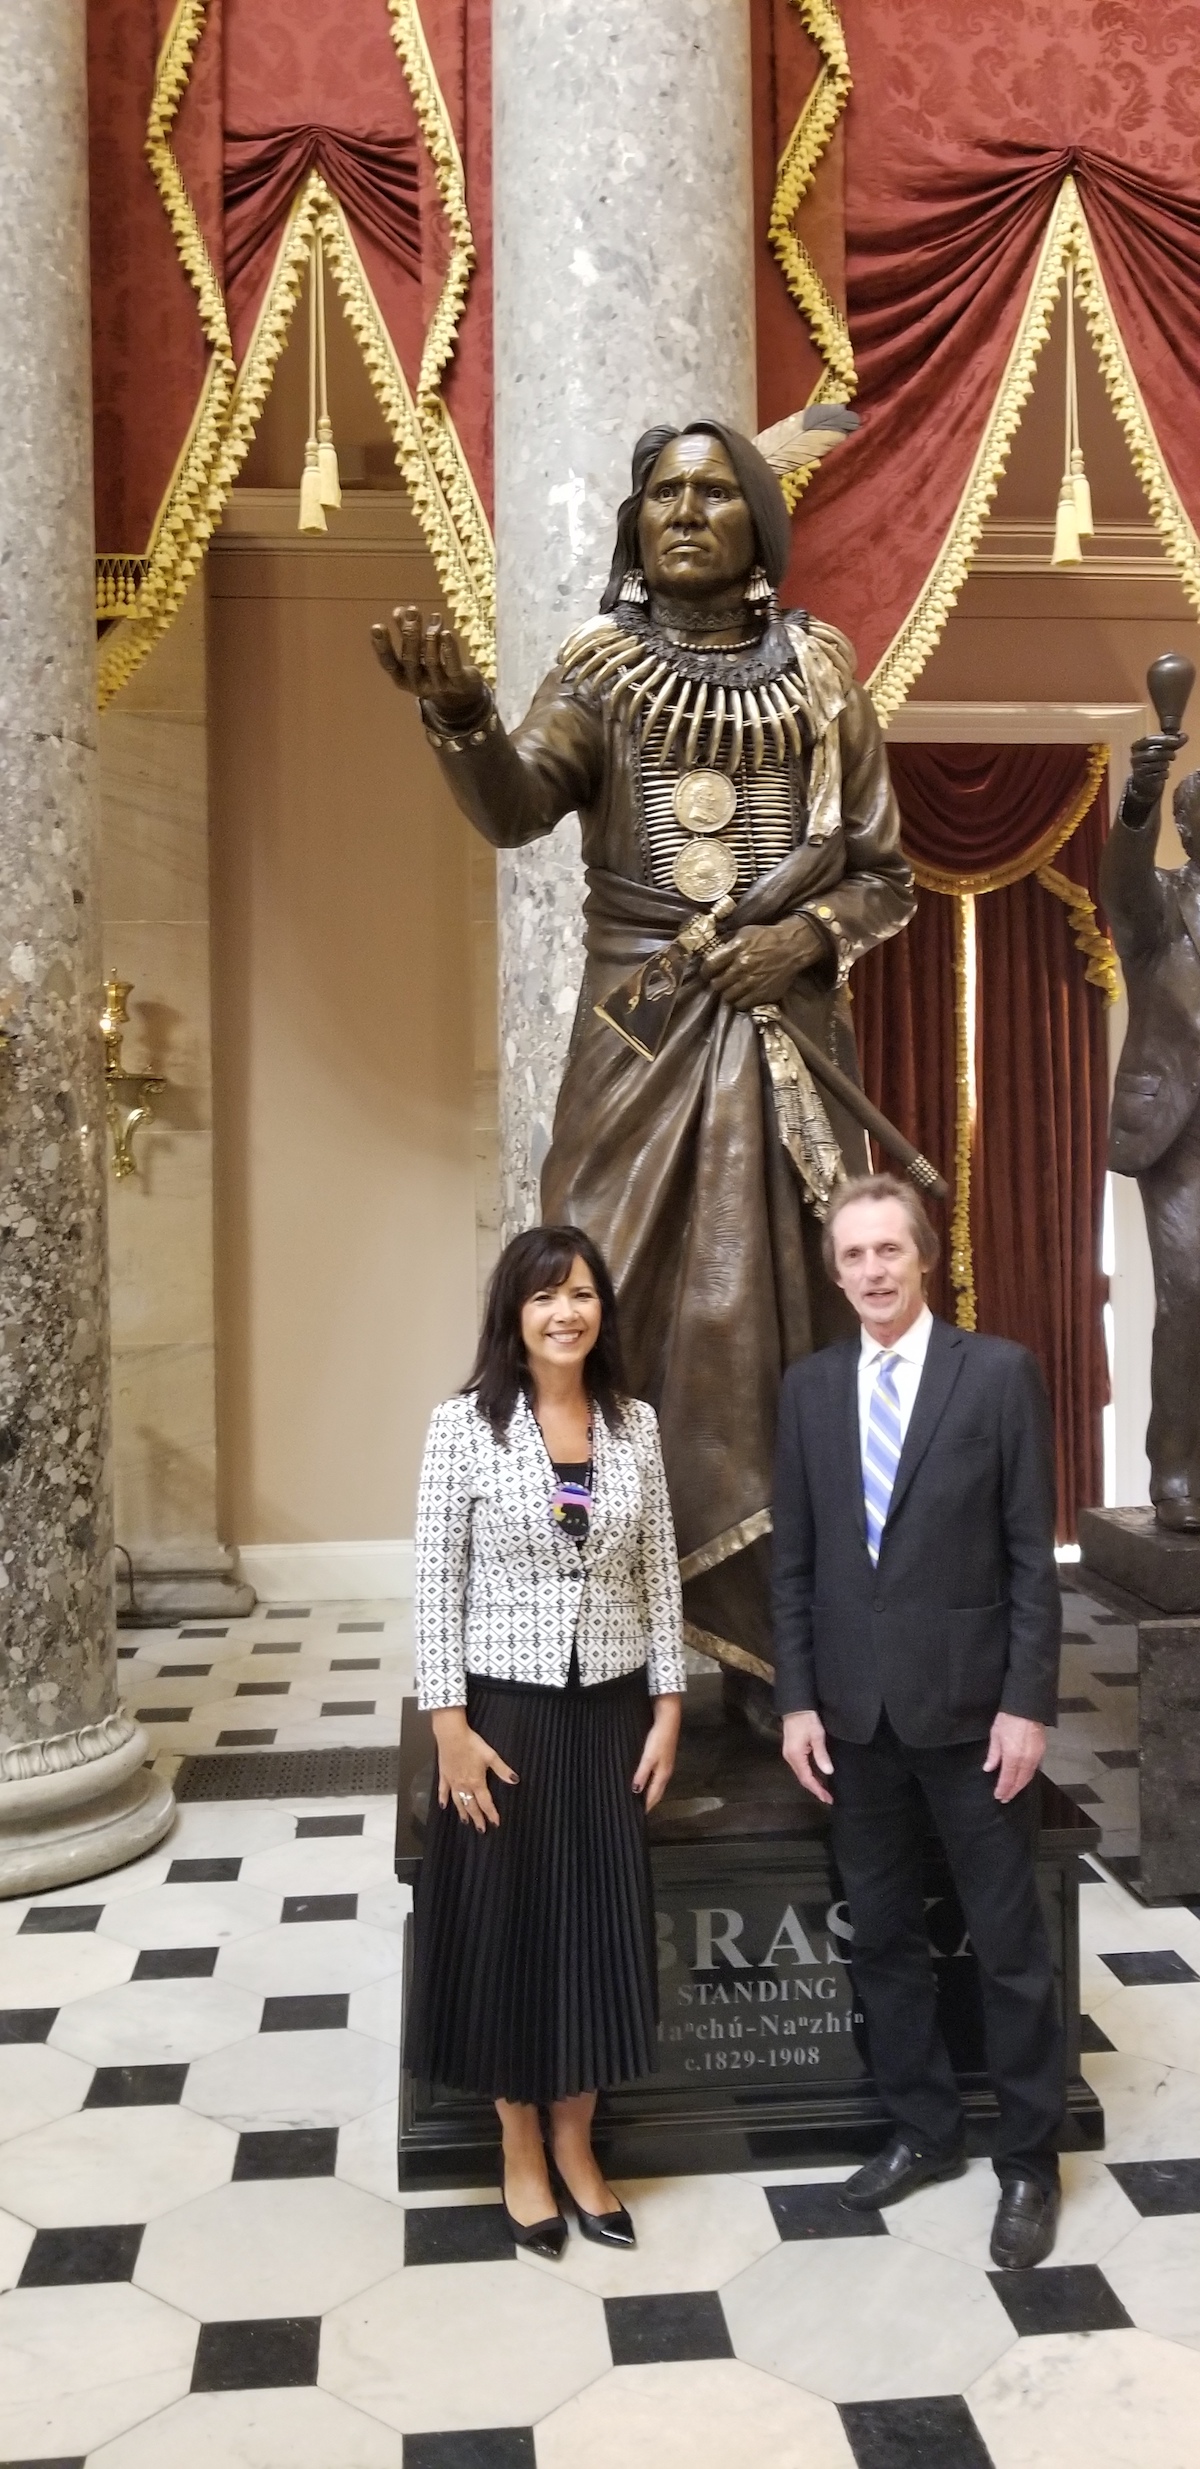 Professor Starita attends the installation of a Chief Standing Bear sculpture at the United States Capitol with Judi gaiashkibos, the executive director of the Nebraska Commission on Indian Affairs.